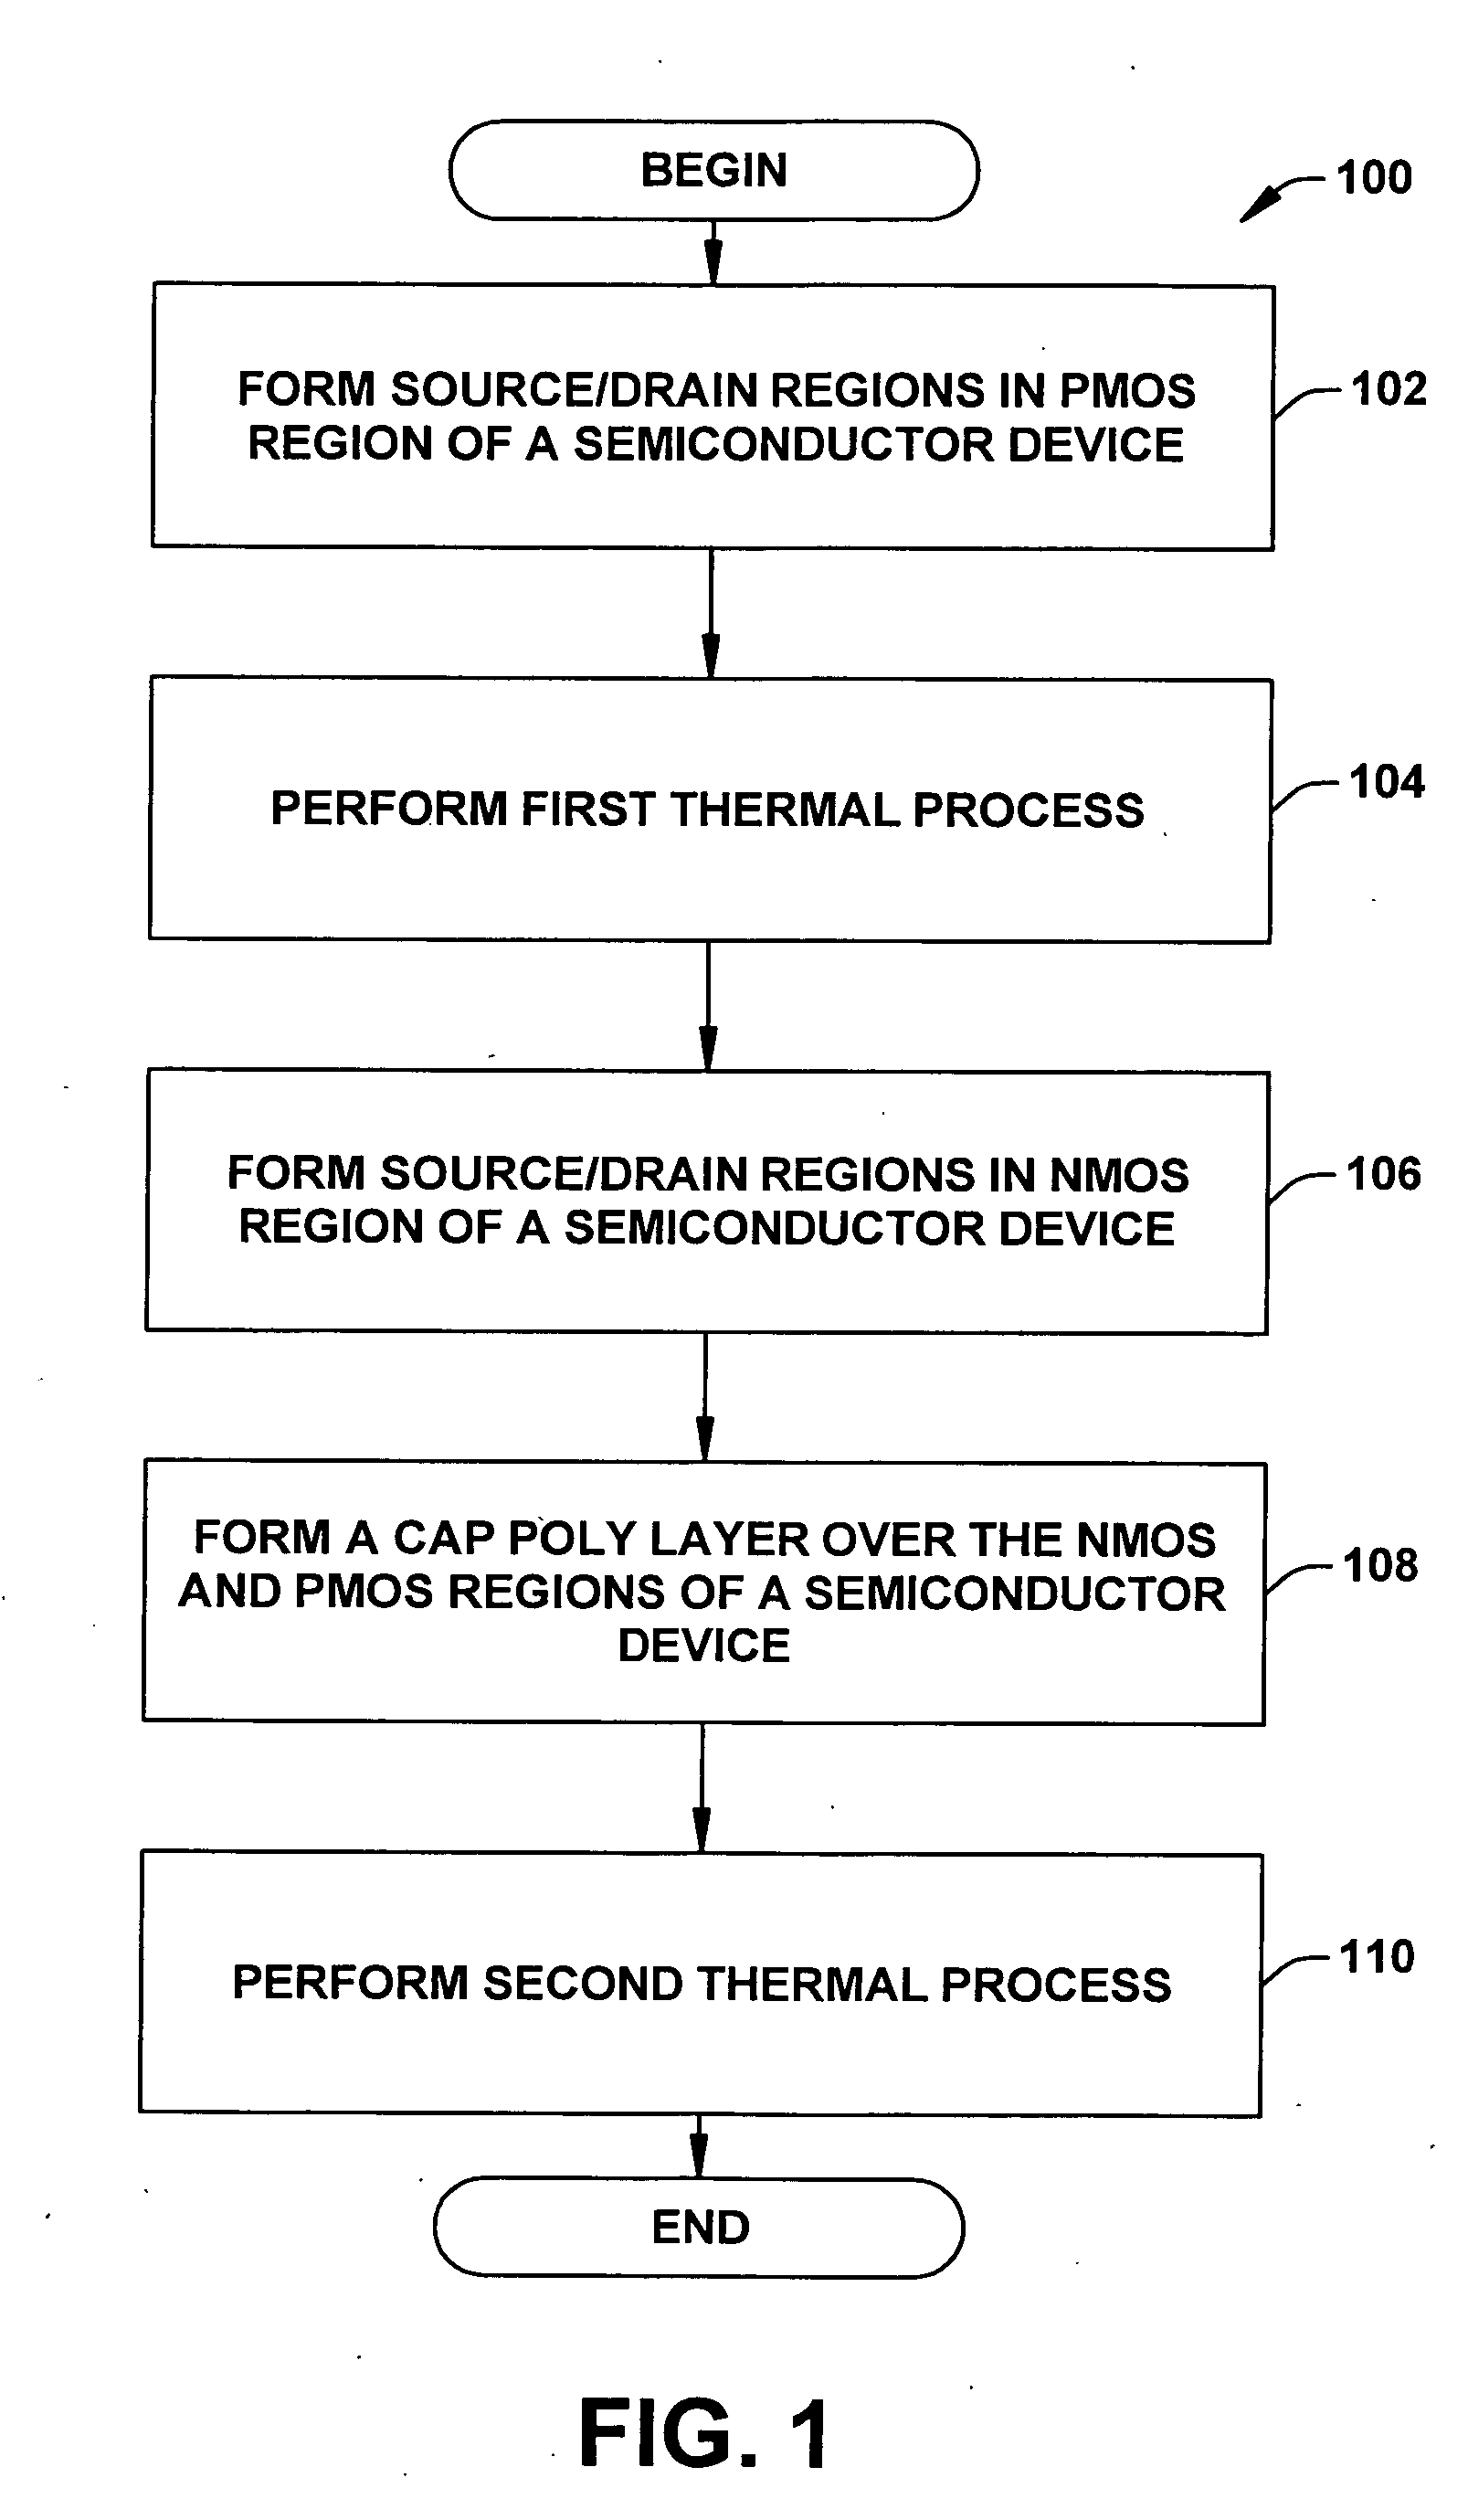 Method to strain NMOS devices while mitigating dopant diffusion for PMOS using a capped poly layer